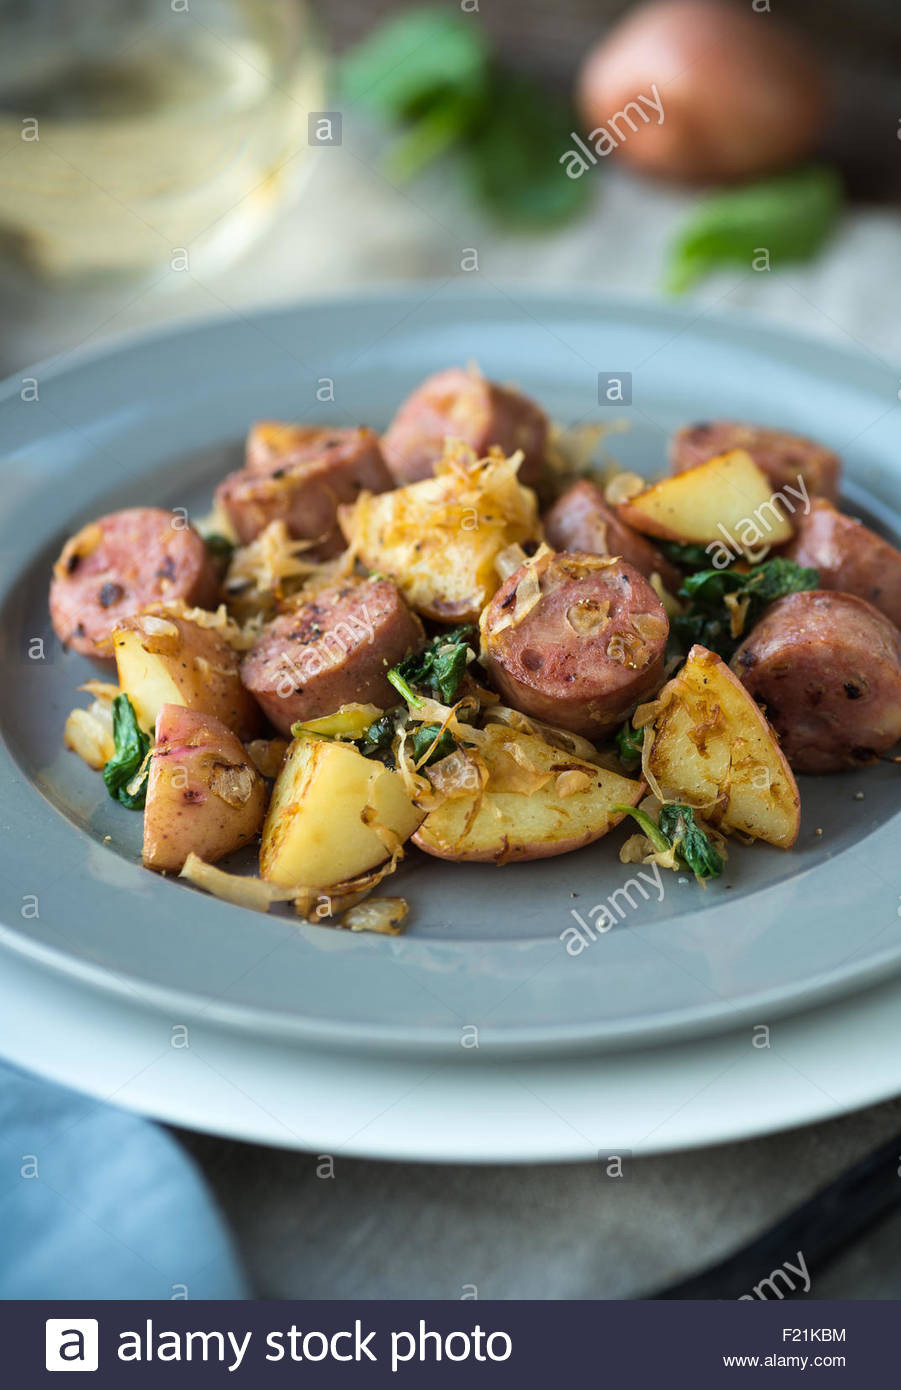 Roasted Yukon Gold Potatoes
 Roasted Yukon gold potatoes with sausages and spinach